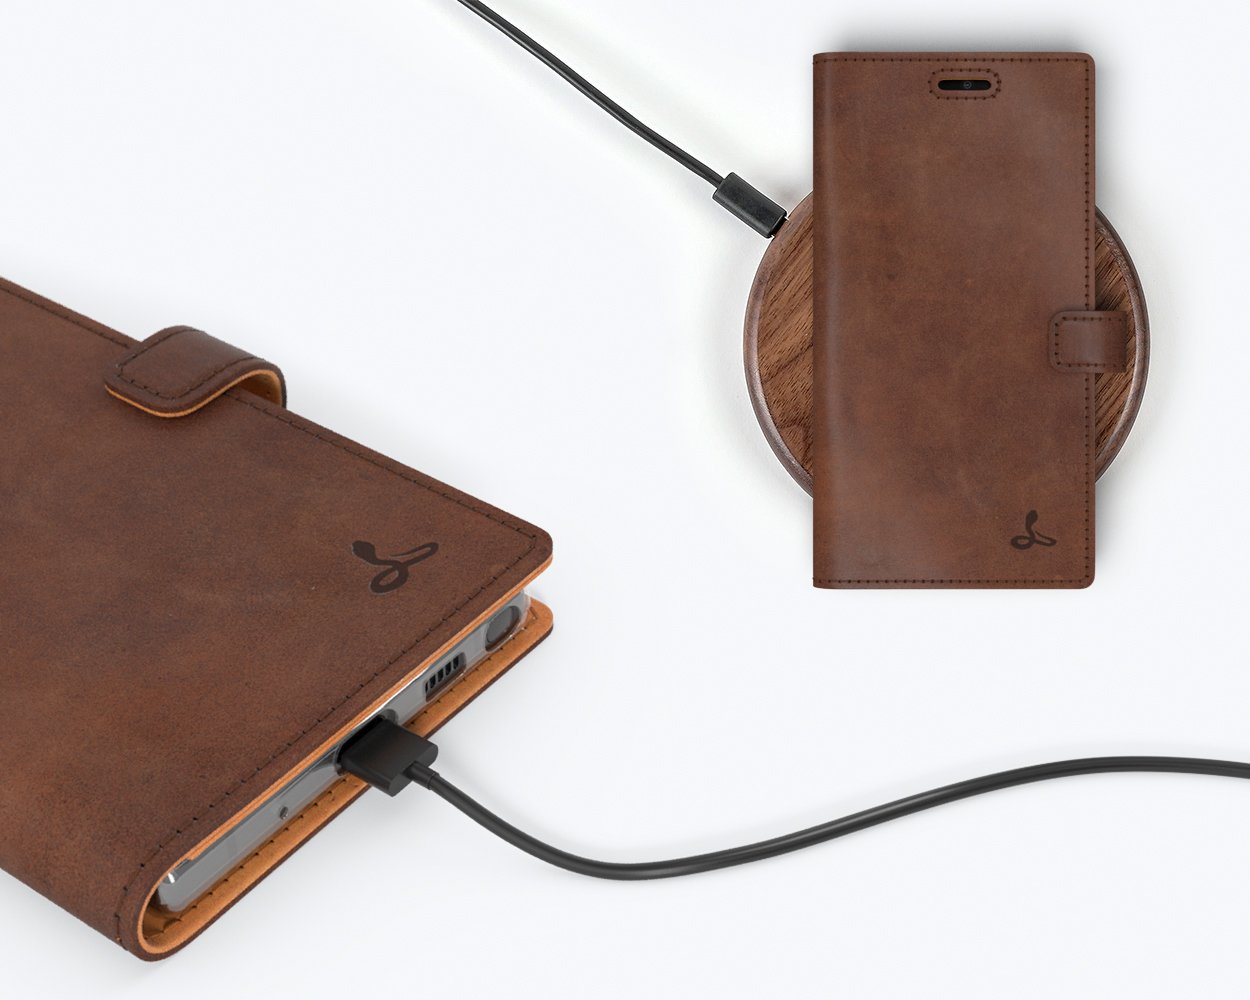 Vintage Leather Wallet - Samsung Galaxy Note 10